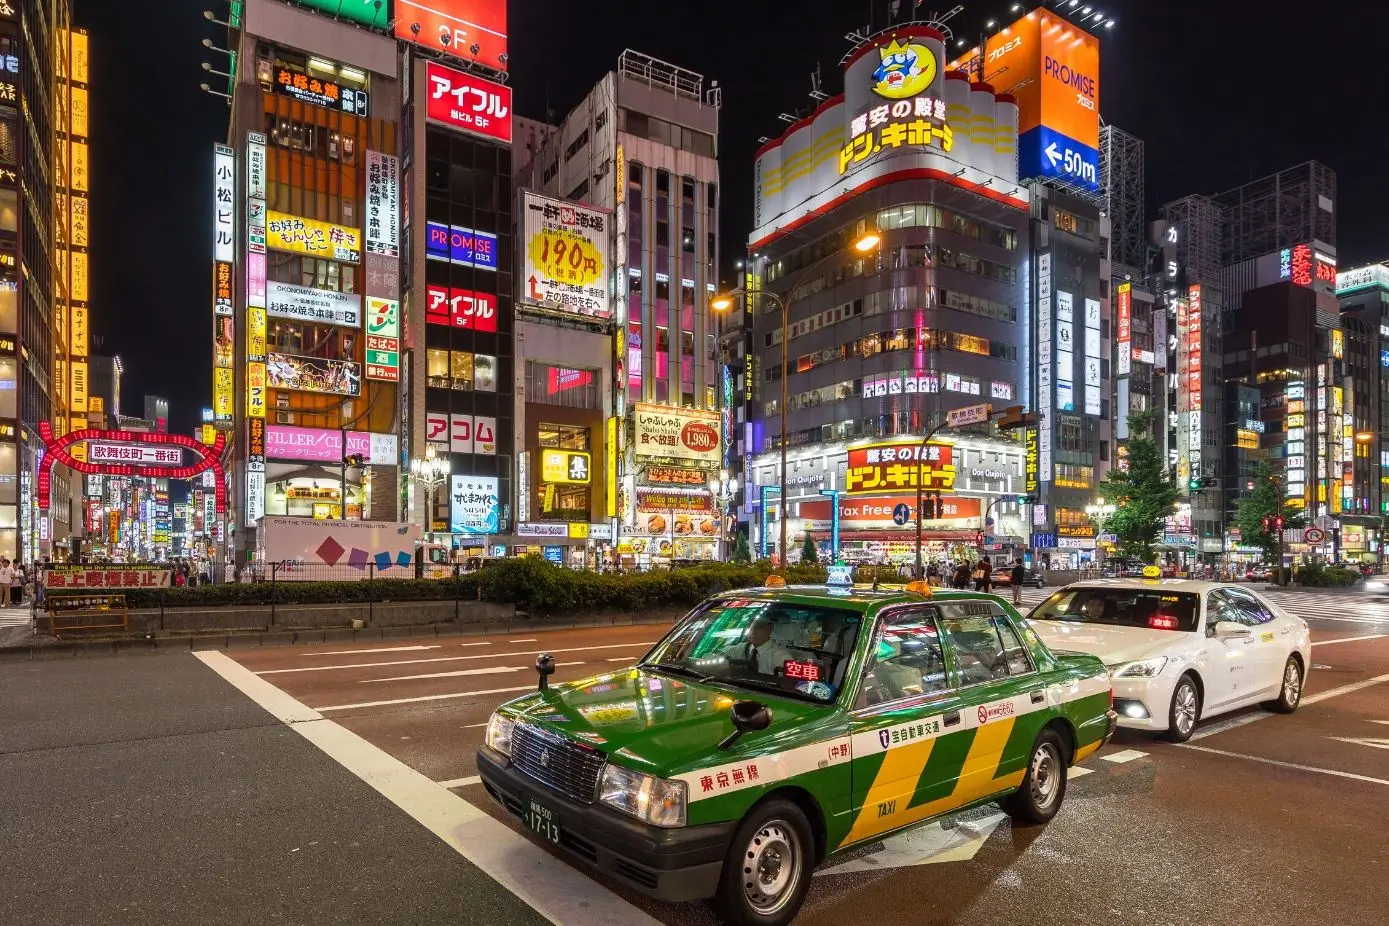 Japanese Public Transportation - Taxis